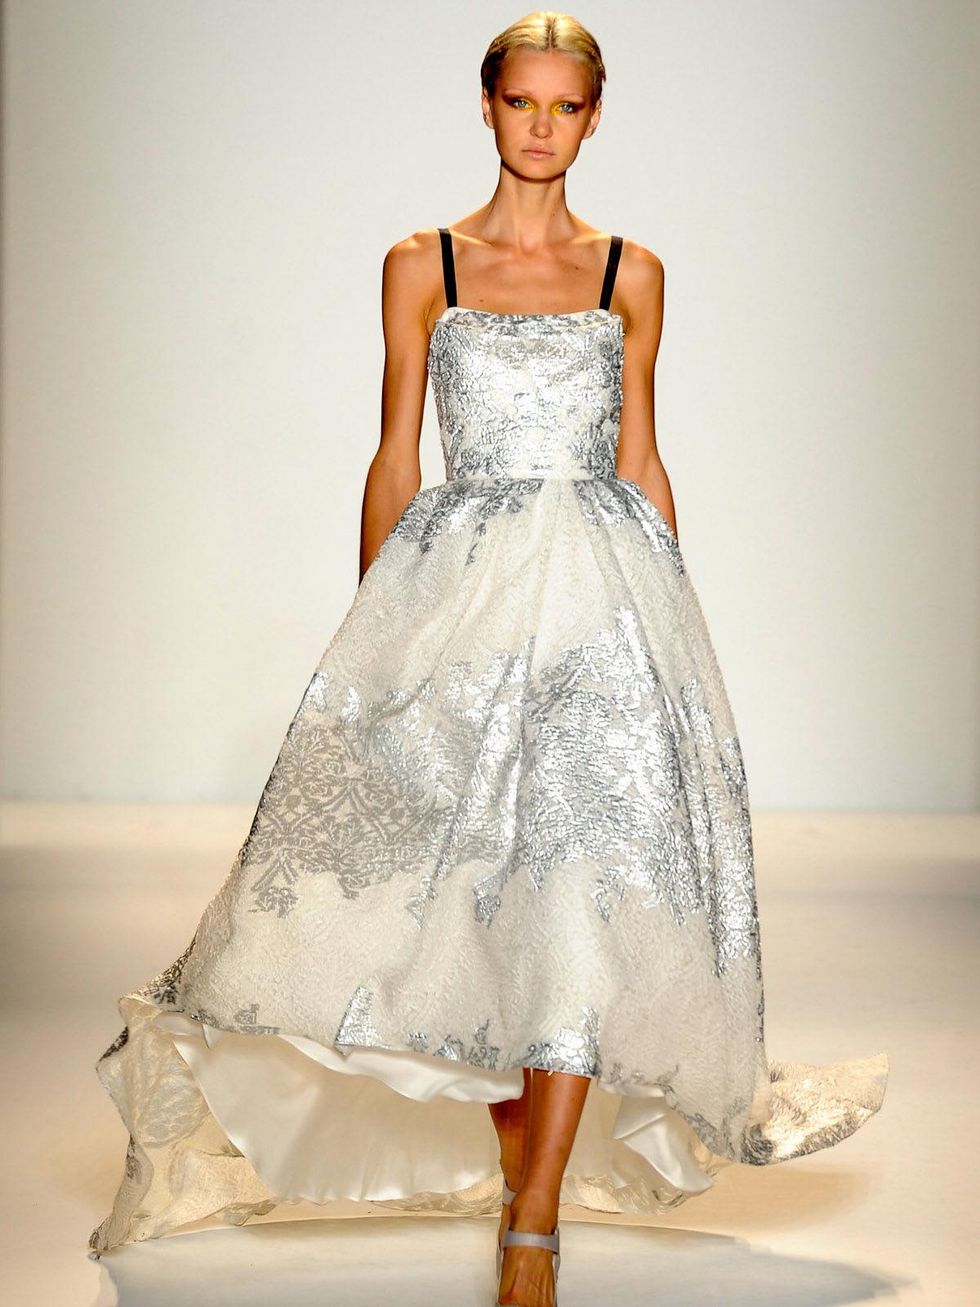 Clifford, Fashion Week spring 2013, Sunday, Sept. 9, 2012, Lela Rose, cream and silver gown